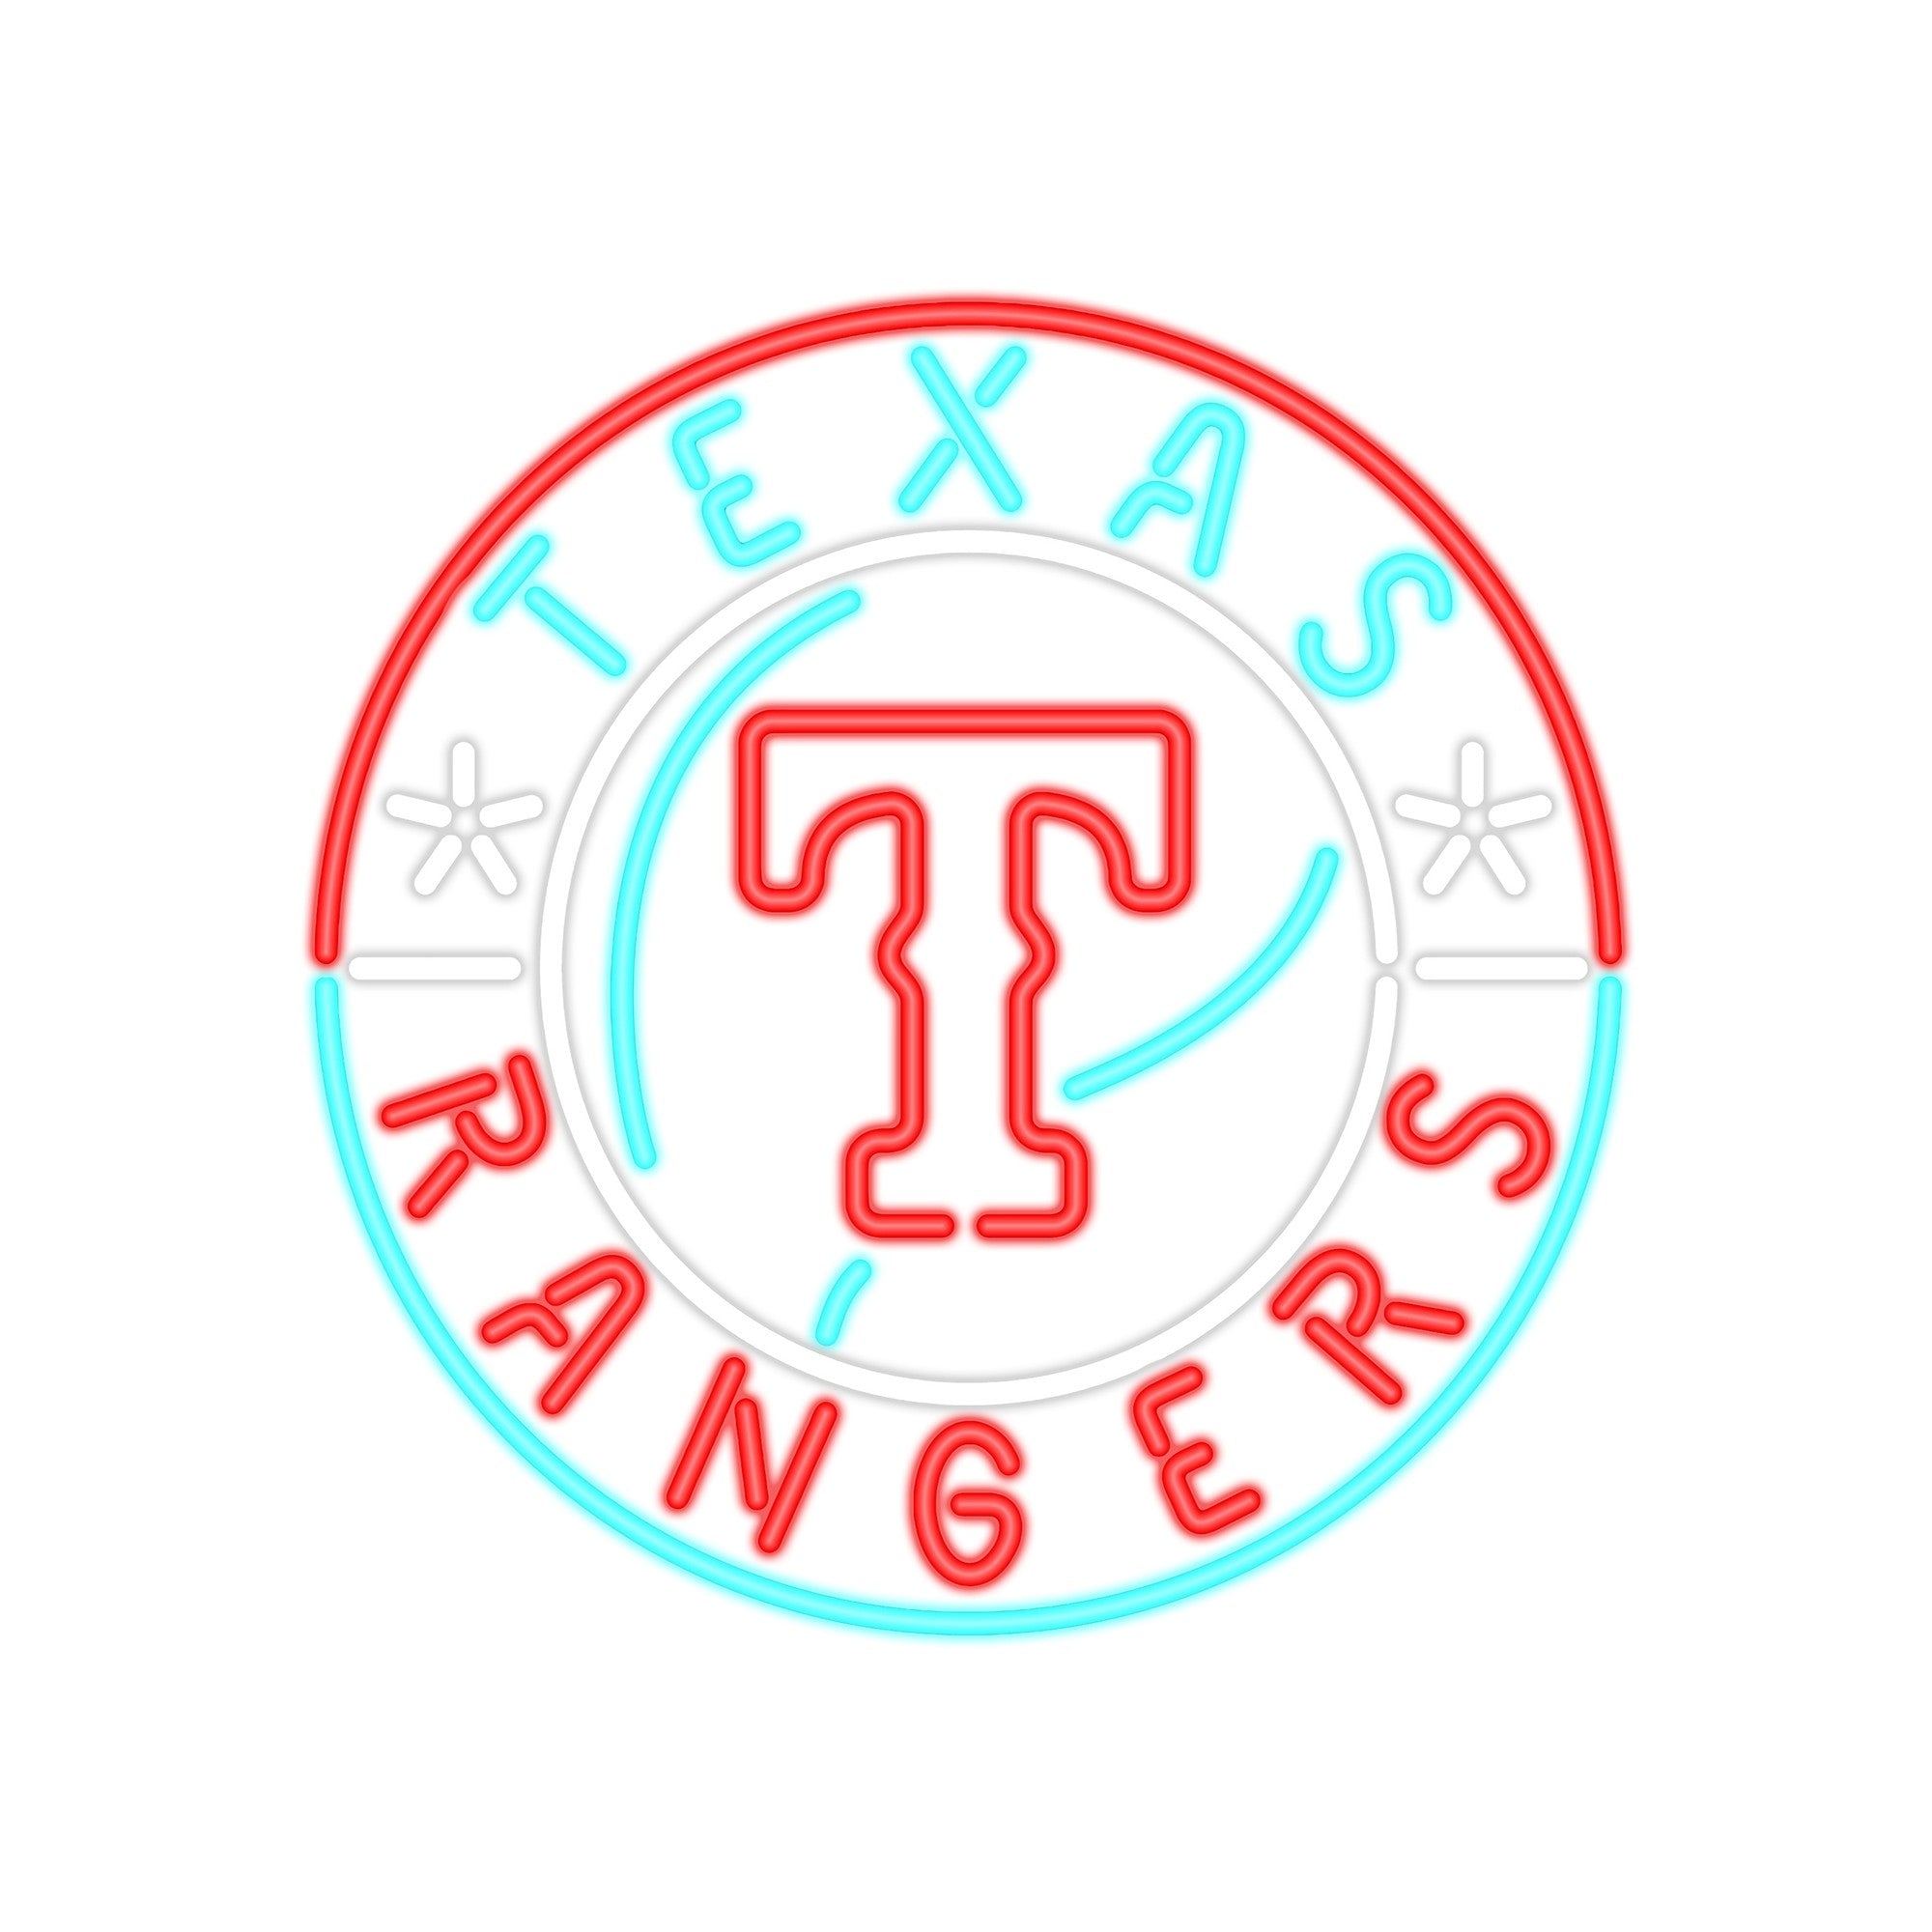 Imperial Texas Rangers Neon Sign